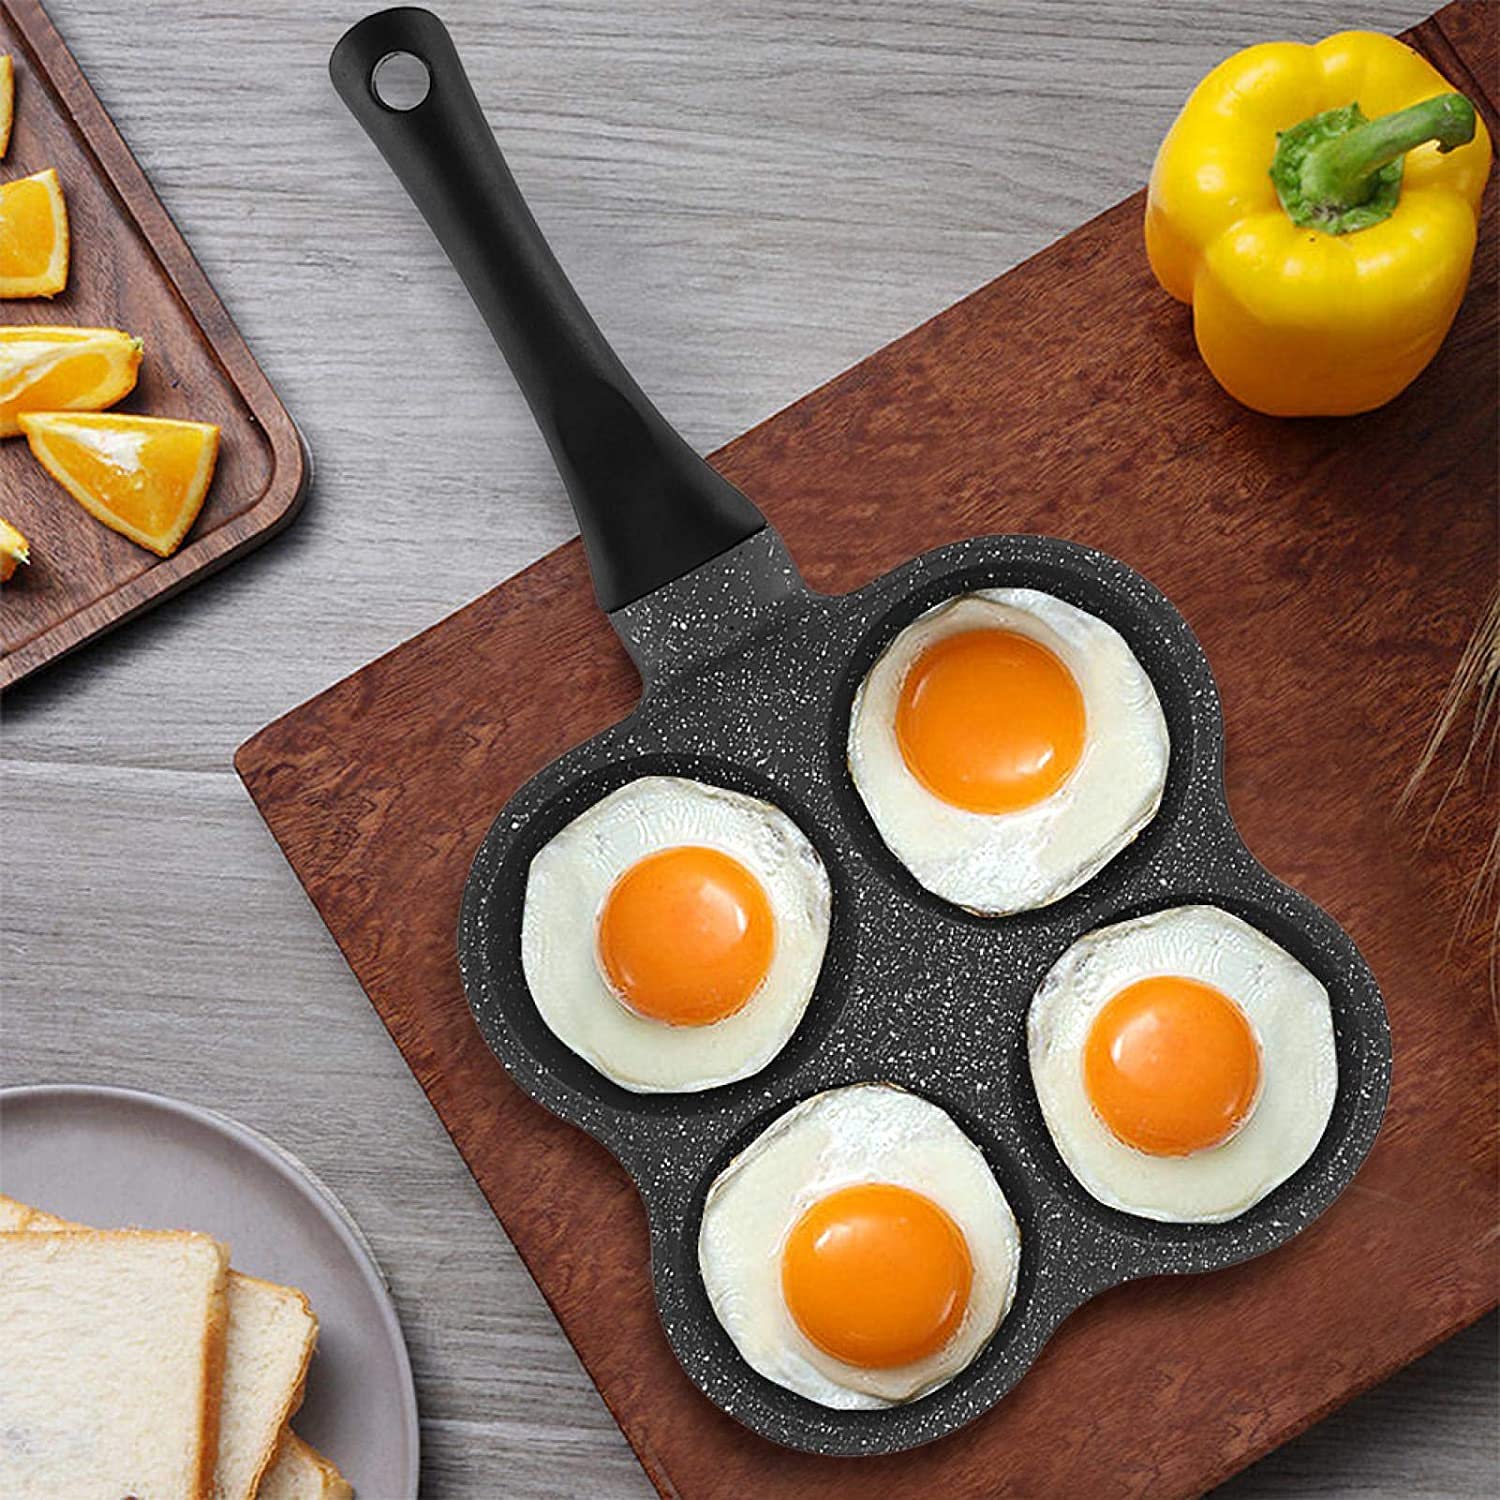 Ymiko 4-Cup Aluminum Egg Frying Pan, Non-Stick, Electric Stovetop Compatible, 18/8 Stainless Steel